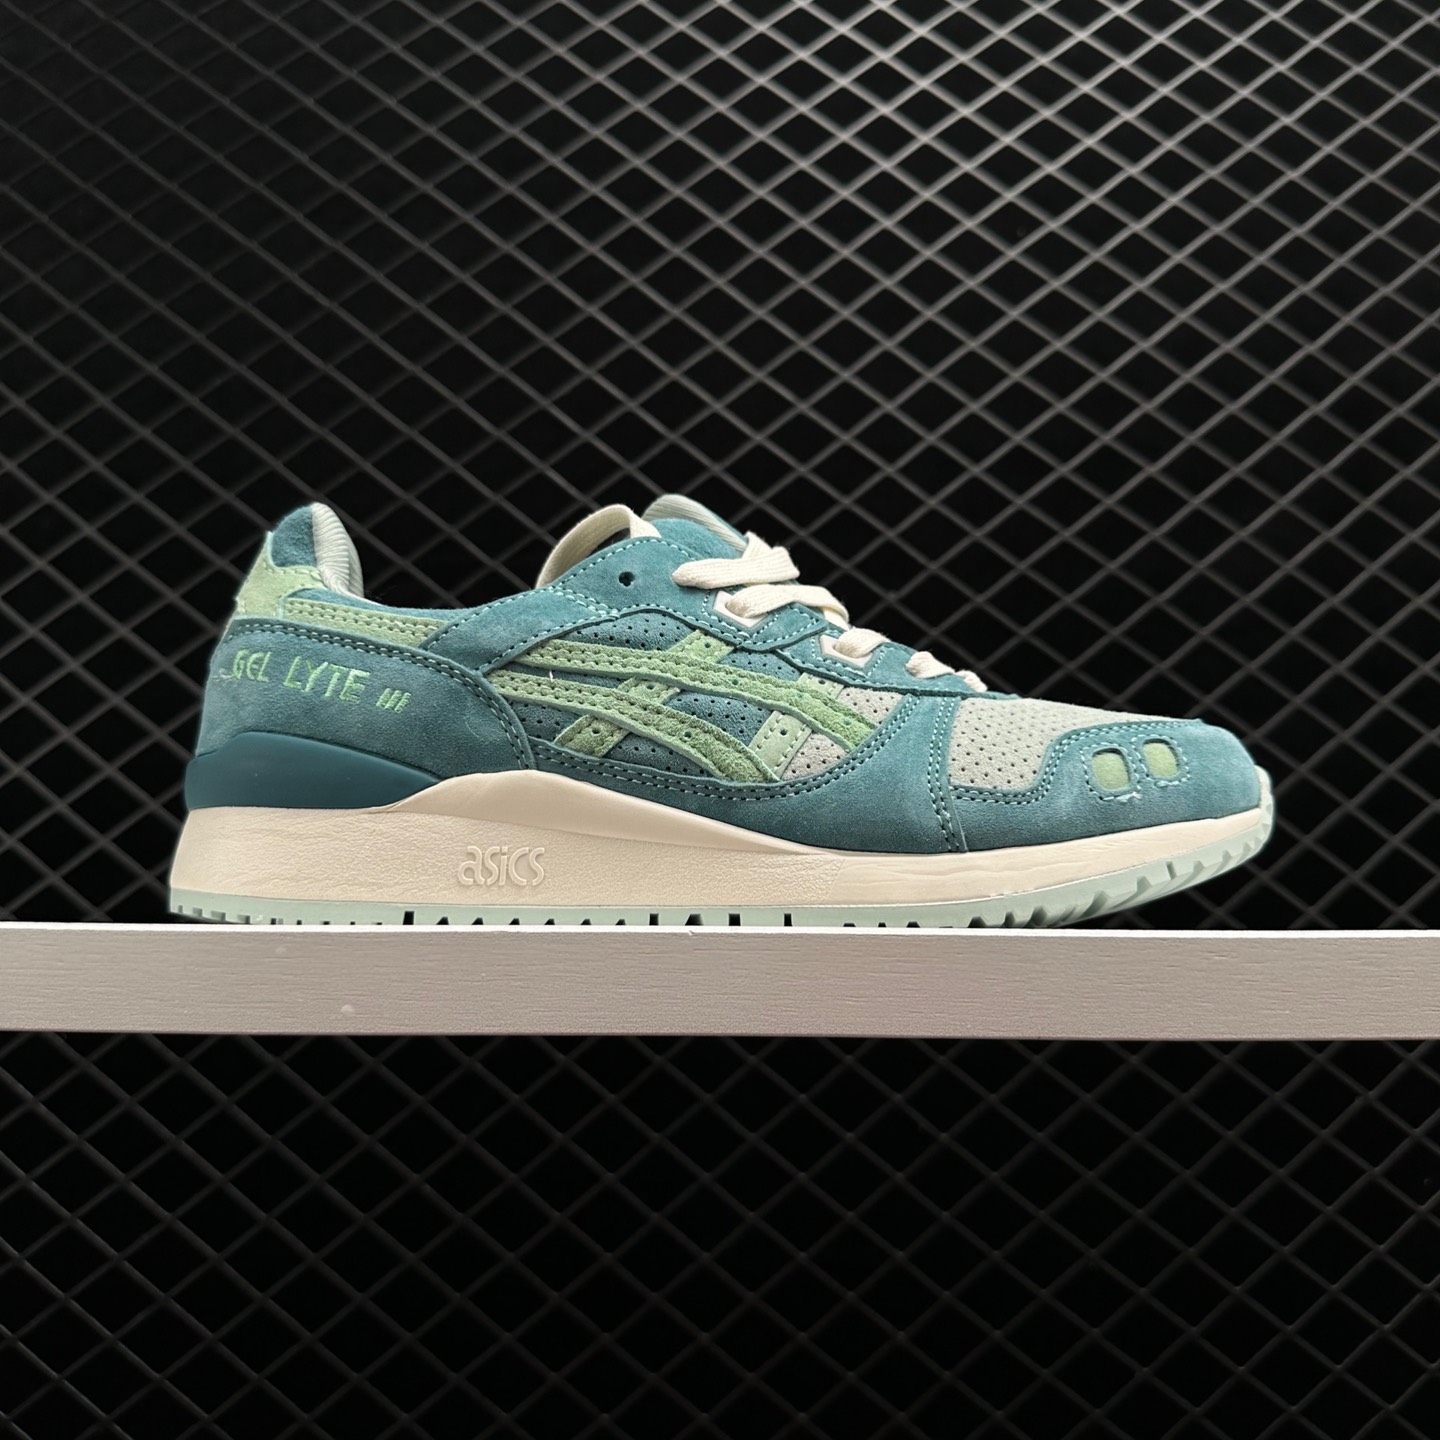 Asics Gel Lyte 3 OG Misty Pine Seasform 1201A164-300 | Stylish and Comfortable Sneakers